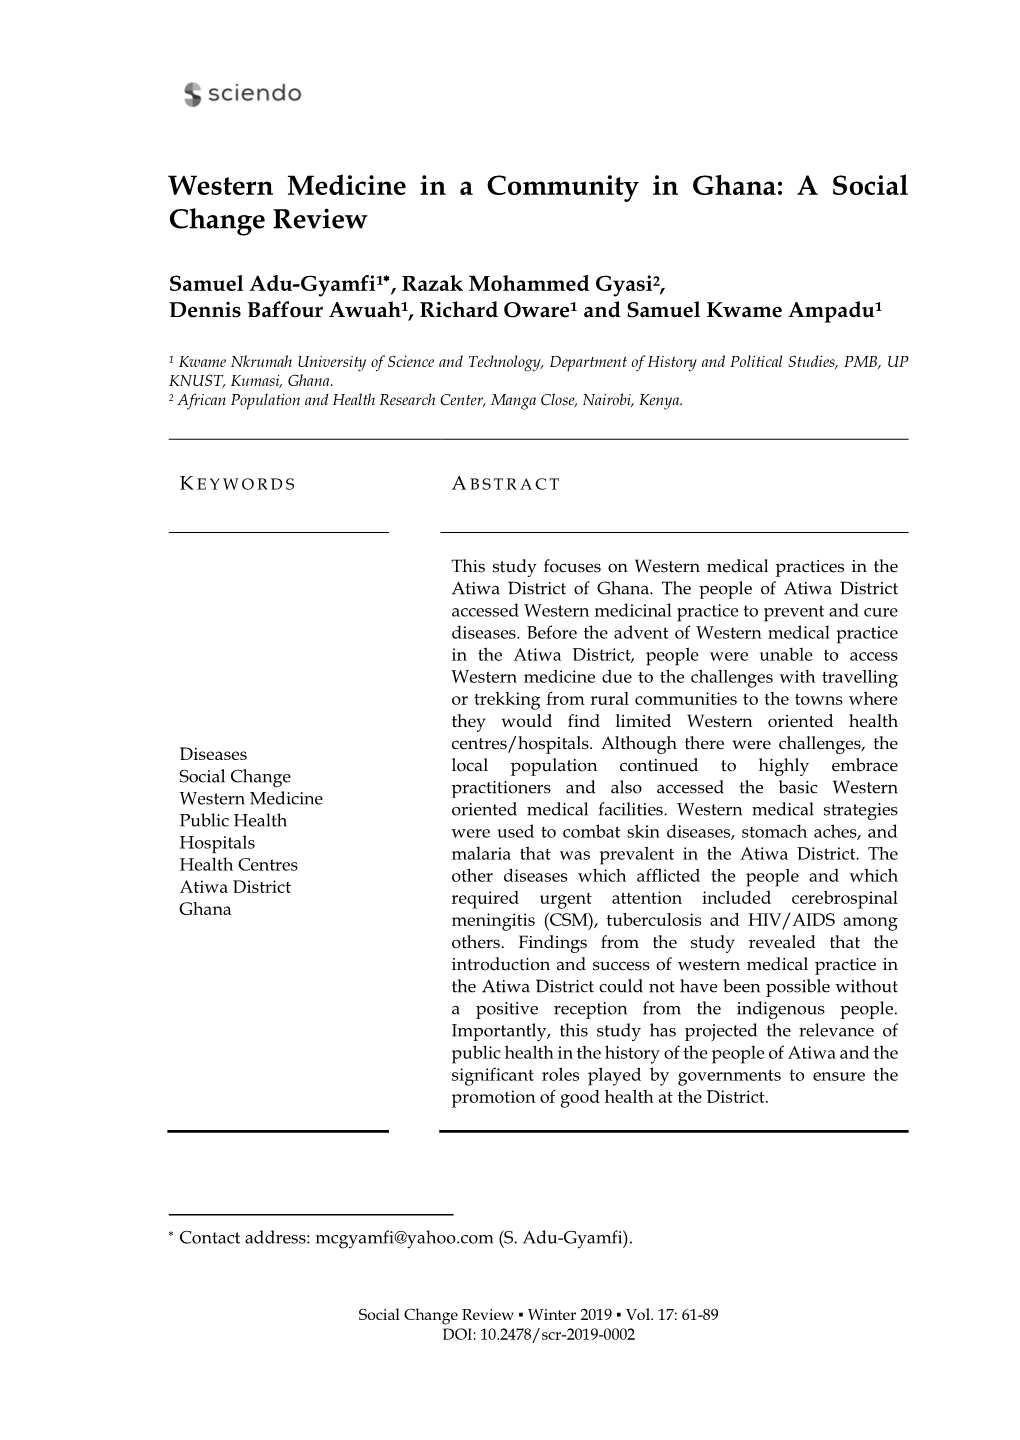 Western Medicine in a Community in Ghana: a Social Change Review